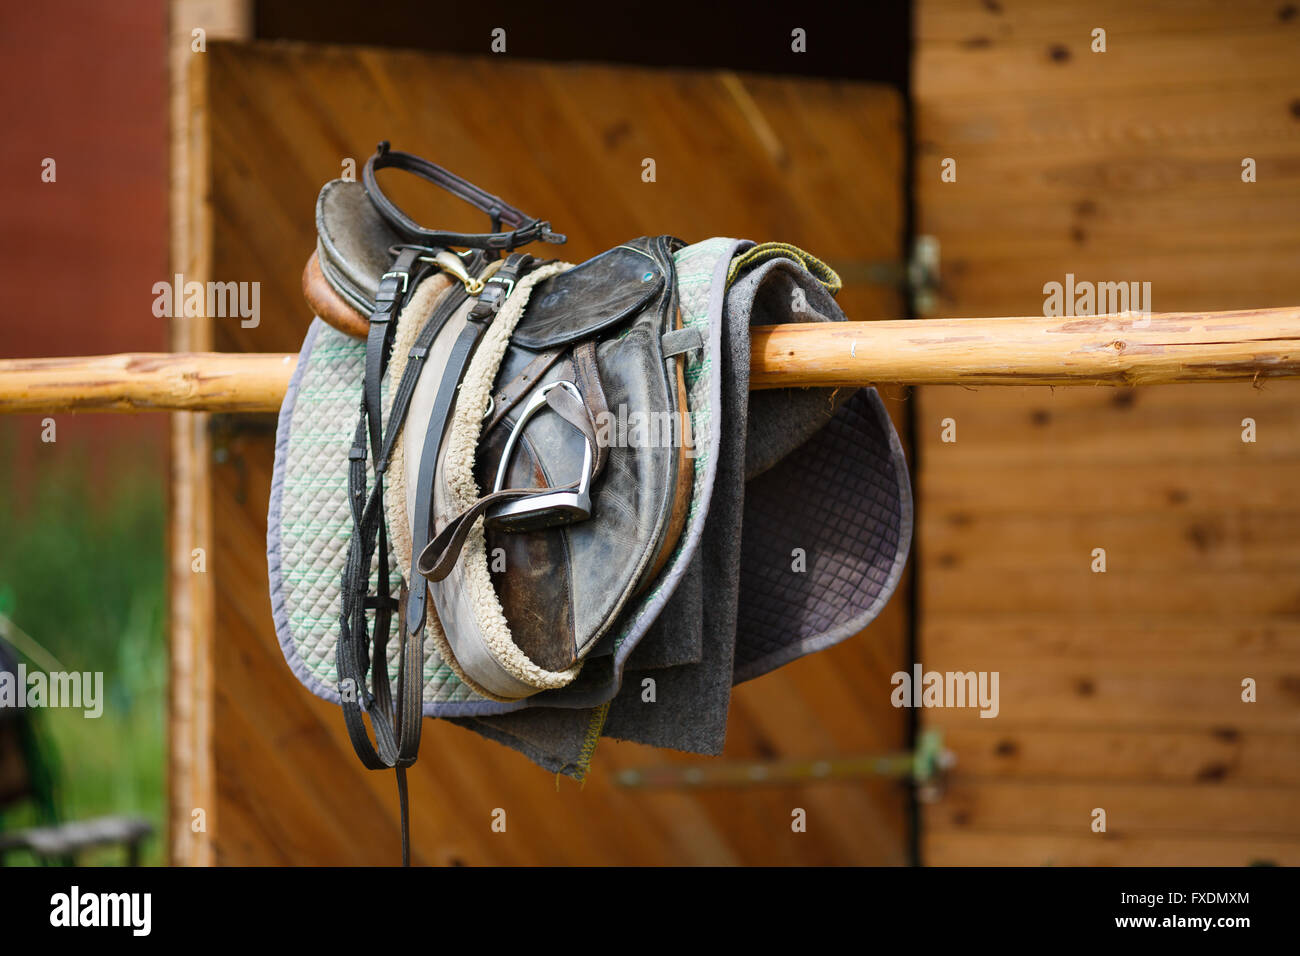 A leather saddles horse in a stable Stock Photo